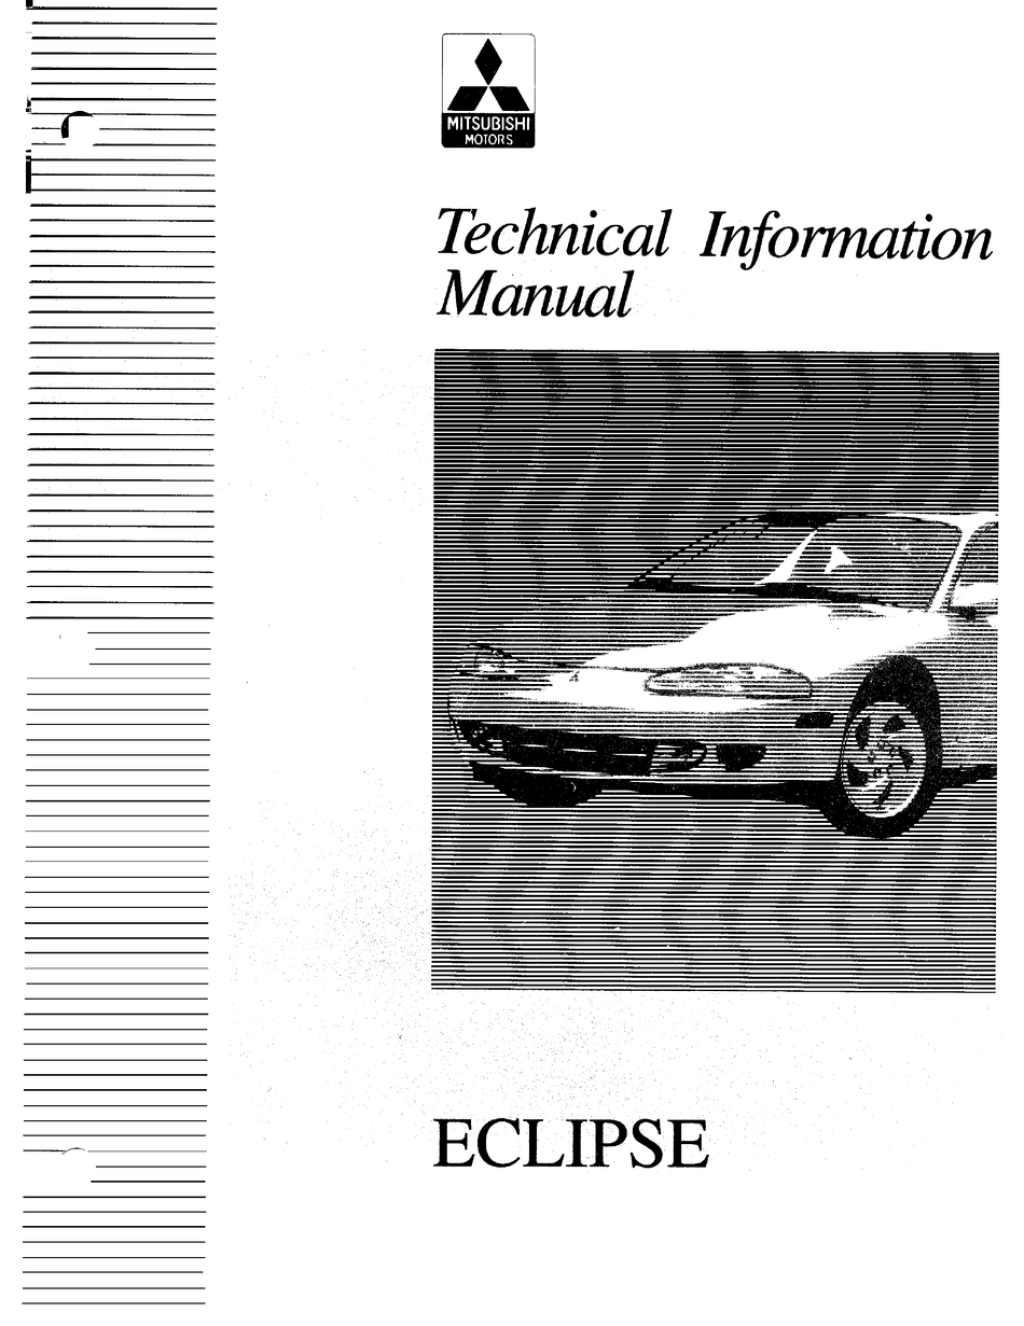 Picture of: MITSUBISHI ECLIPSE TECHNICAL INFORMATION MANUAL Pdf Download